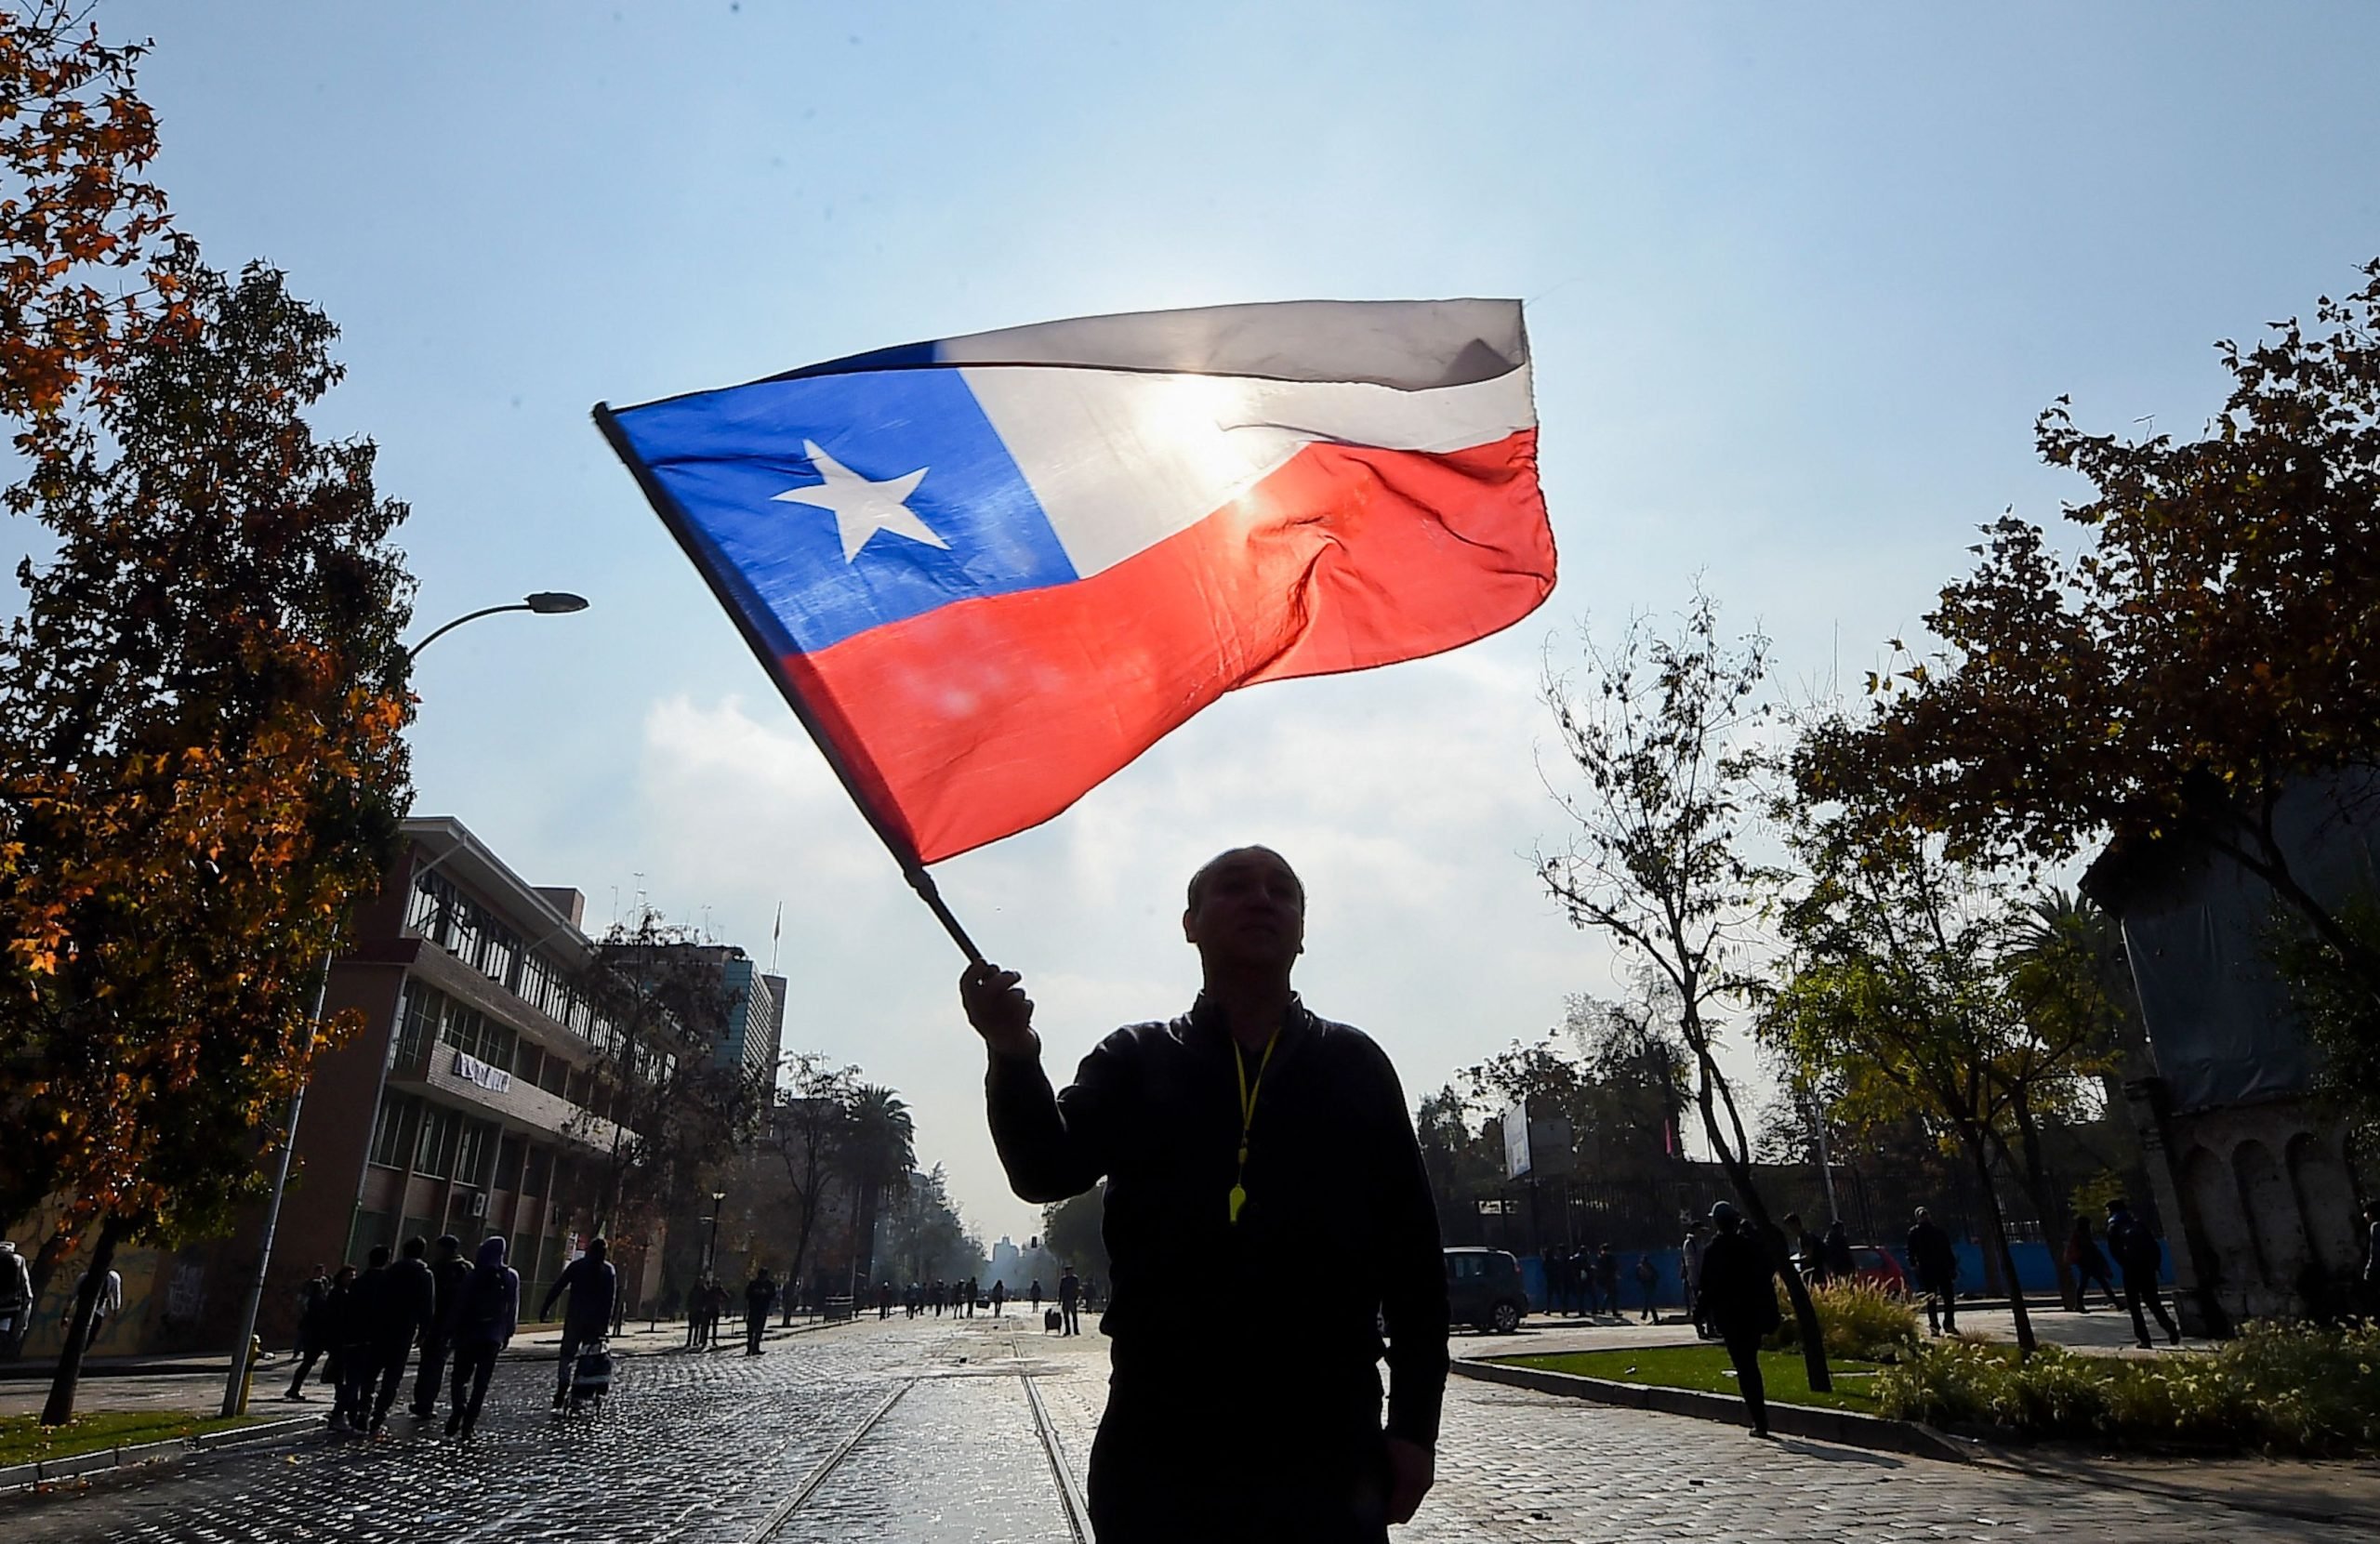 A man waves Chile's flag in public